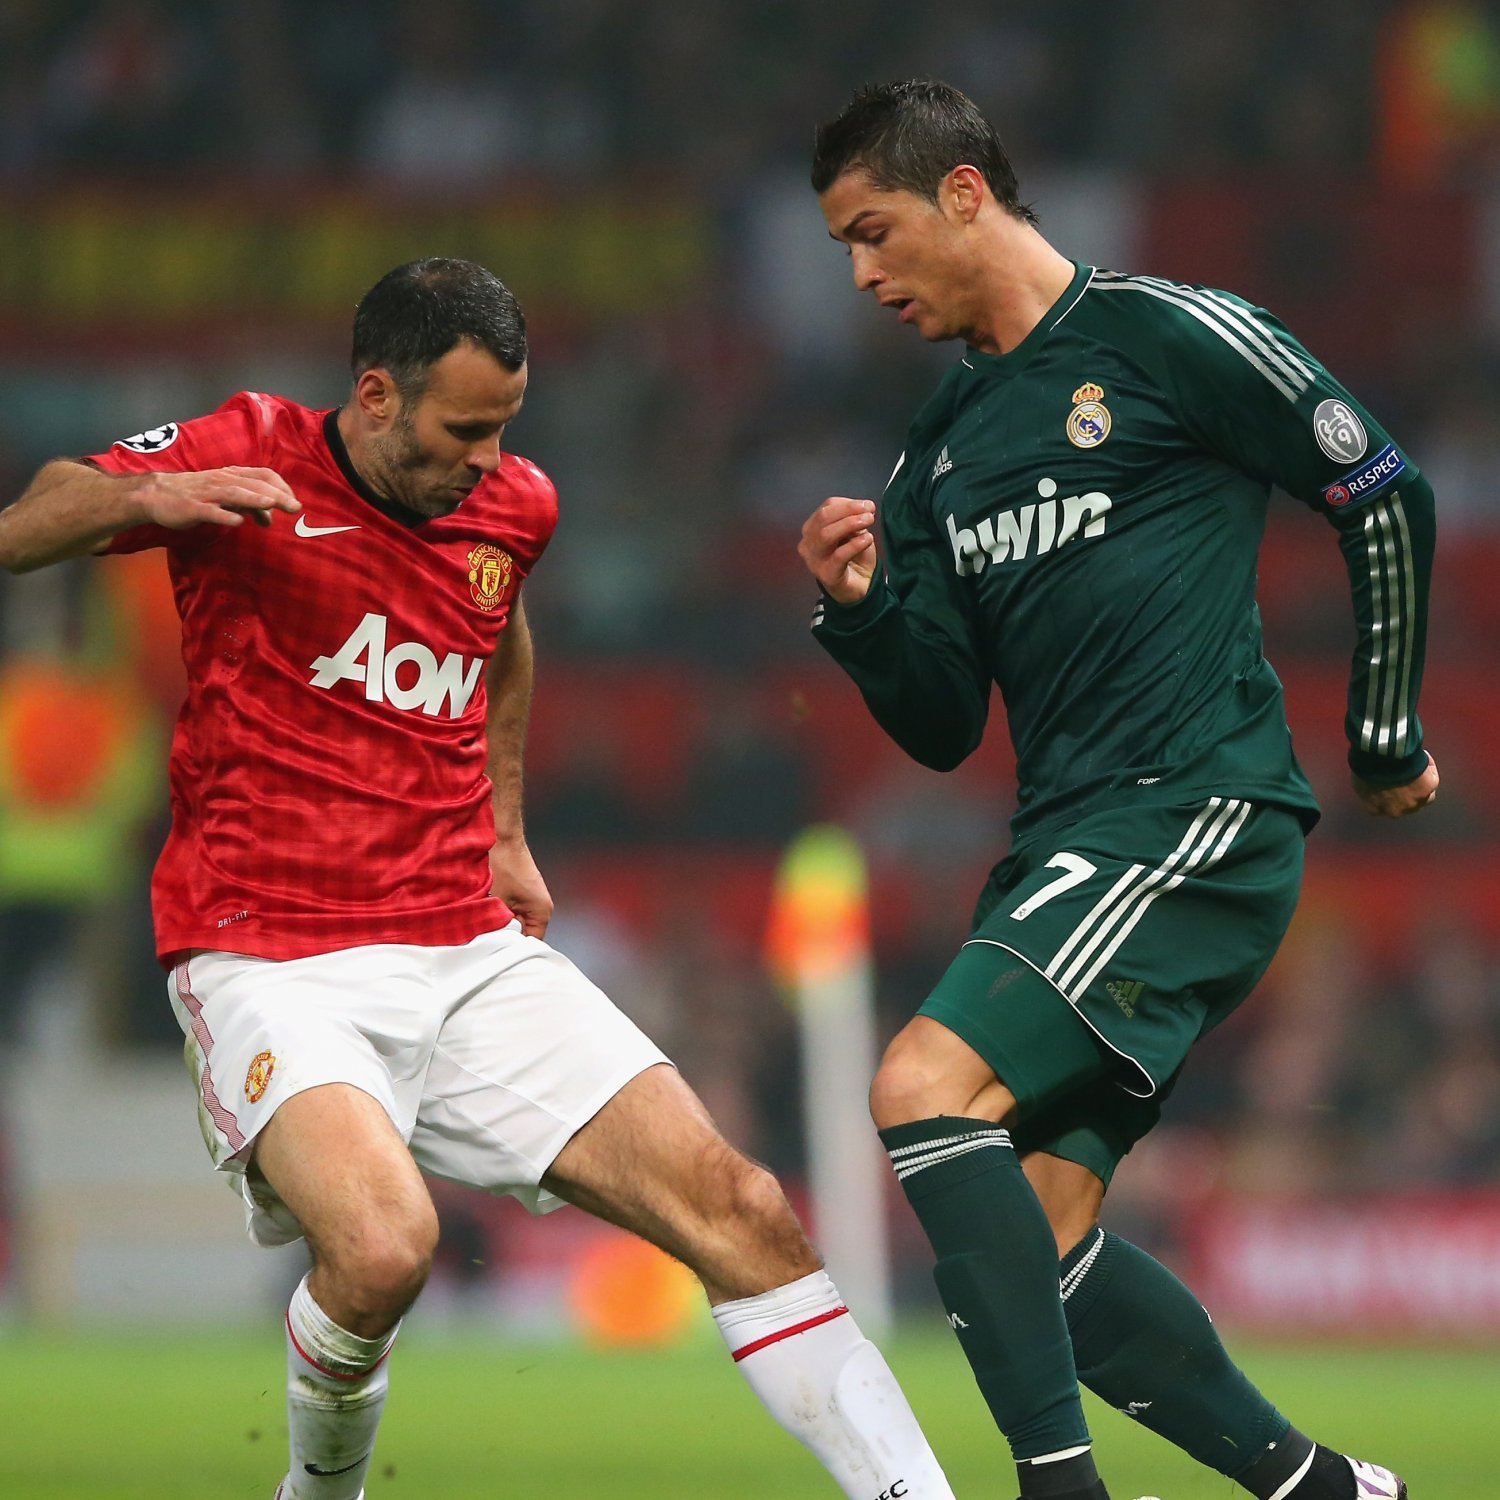 Manchester United vs. Real Madrid Live Score, Highlights and Analysis